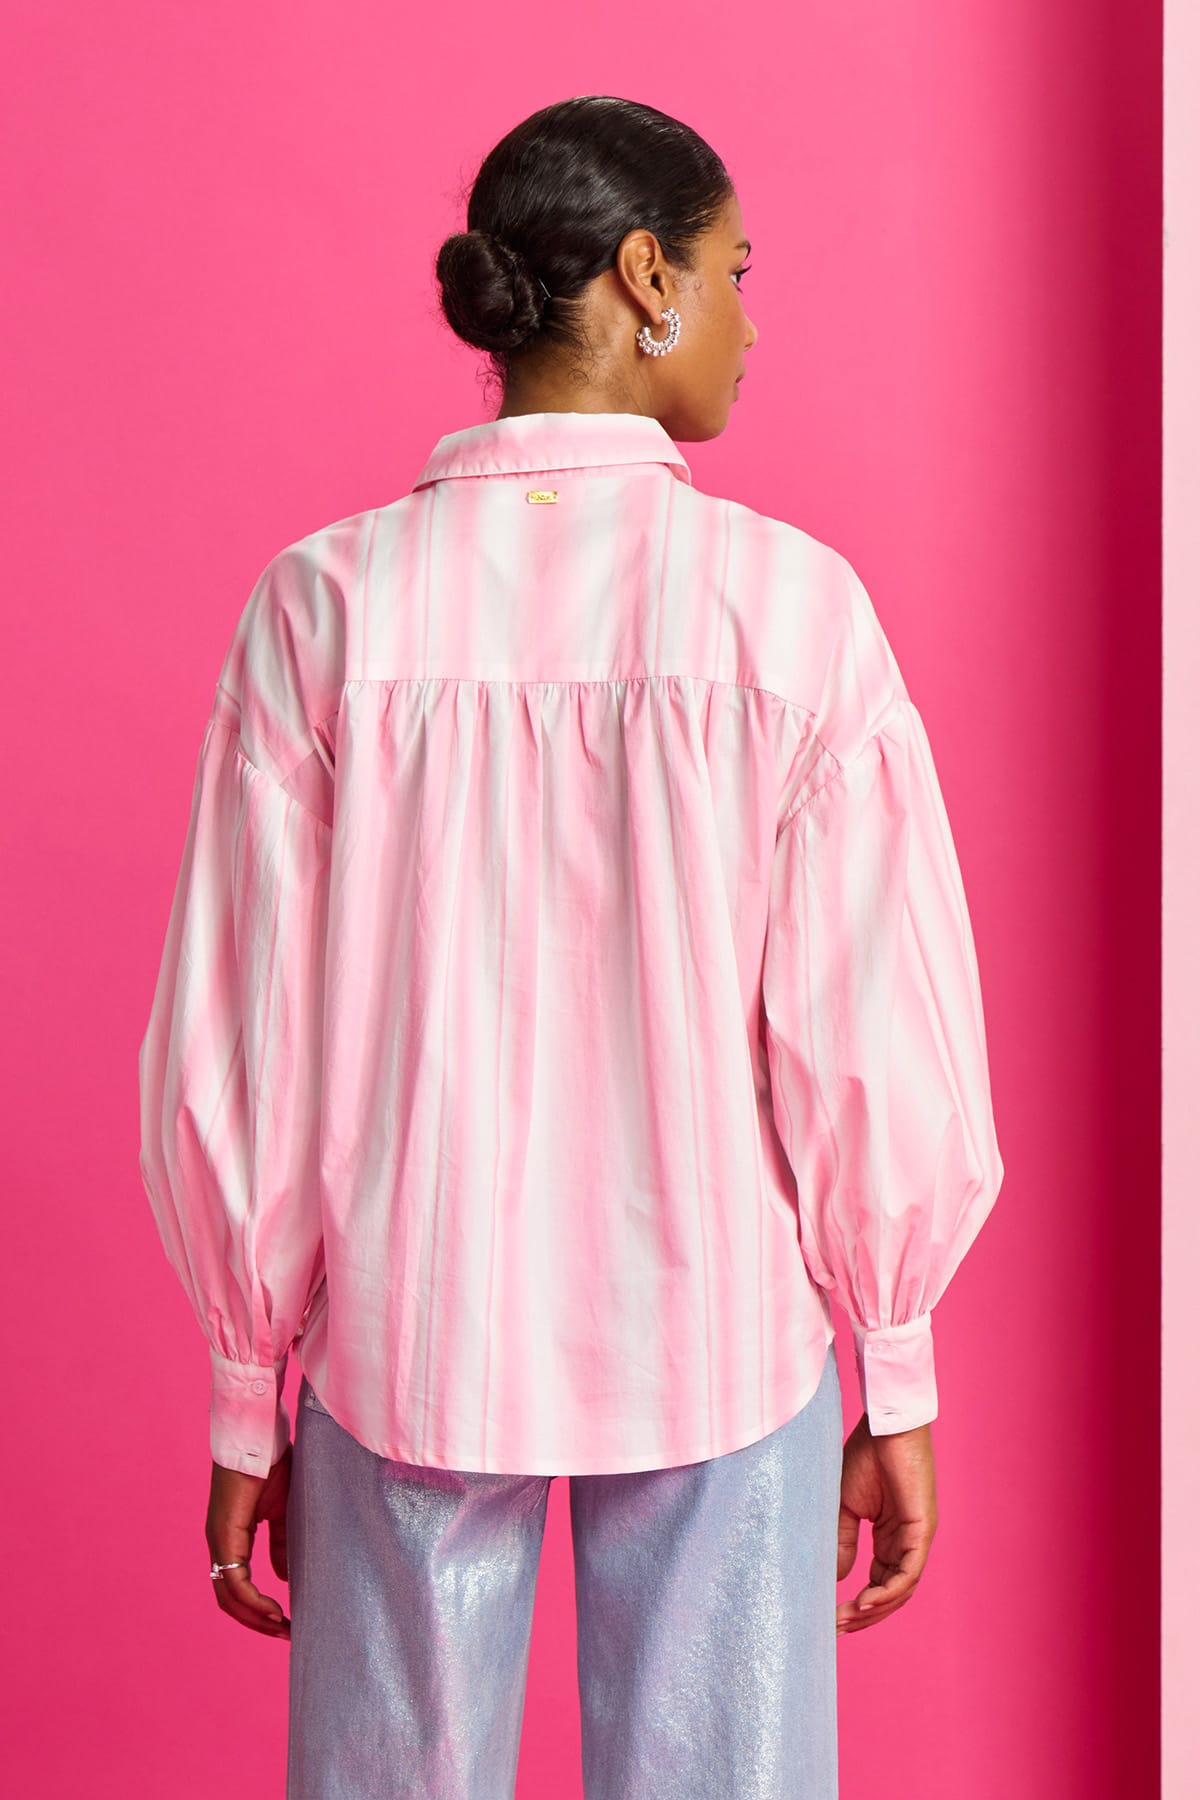 Bluse Embroidery Striped Pink Bluse POM Amsterdam 